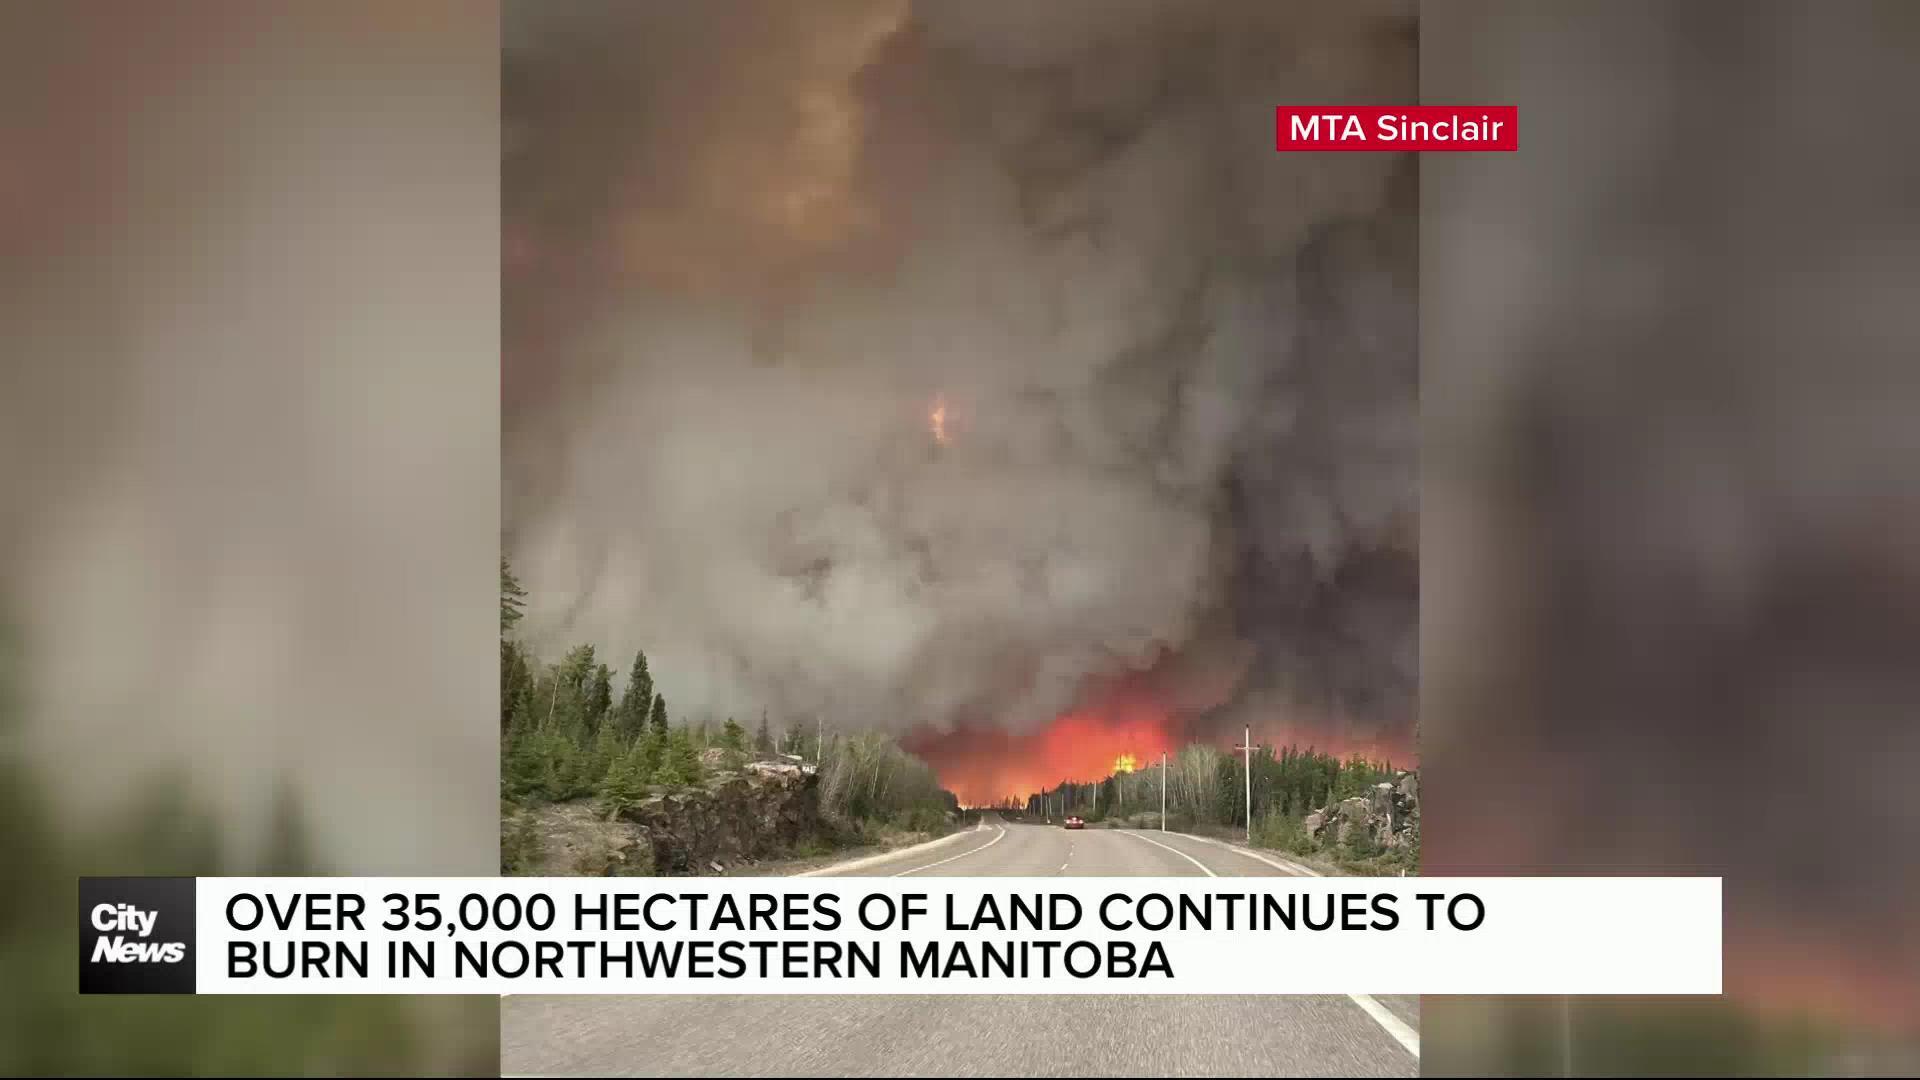 ens of thousand of hectares continues to burn near Flin Flon, pushing smoke across Manitoba